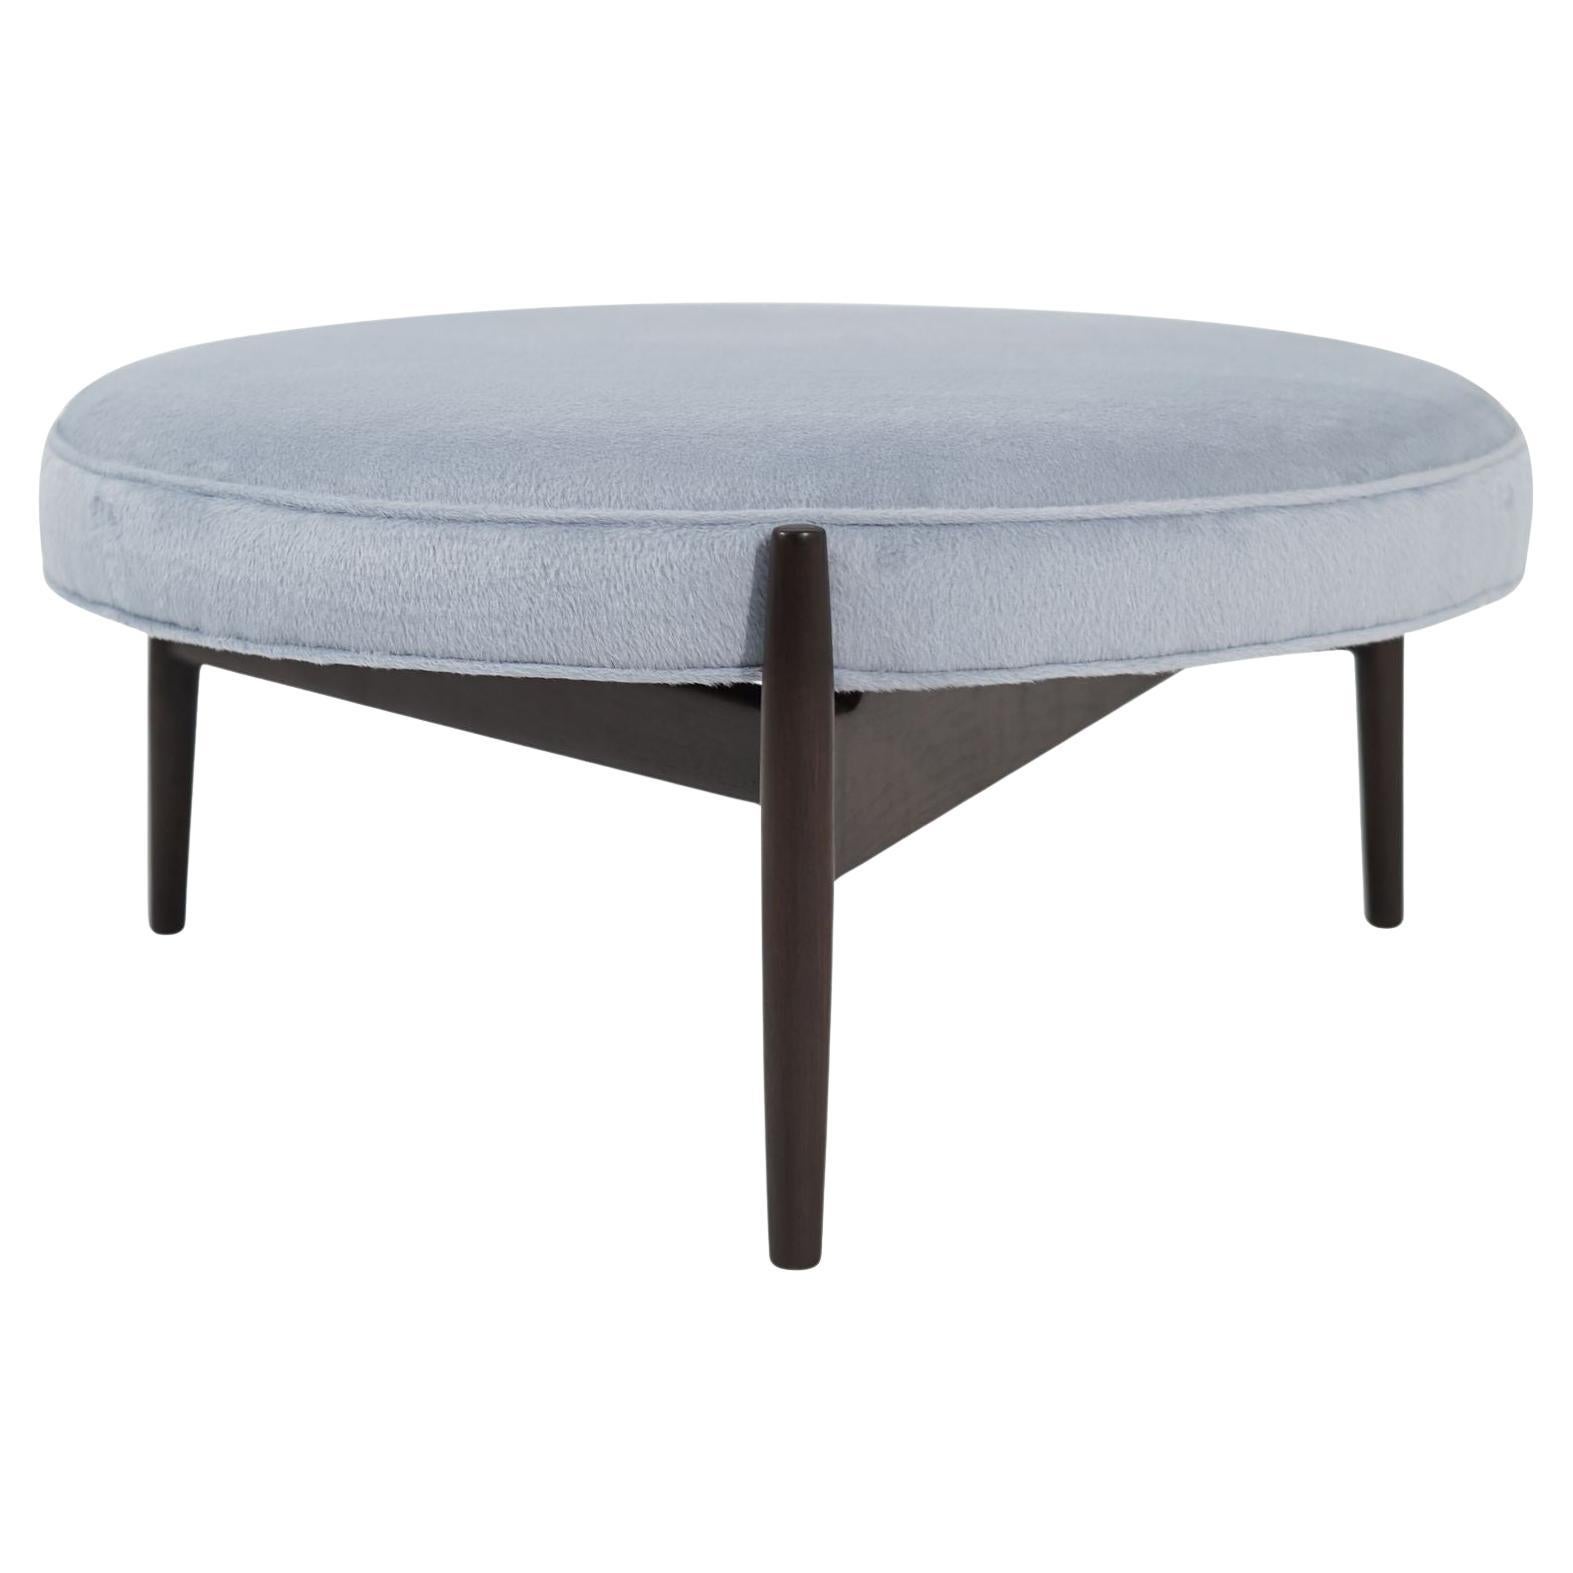 Jens Risom Ottoman in Light Blue Mohair, circa 1960s For Sale